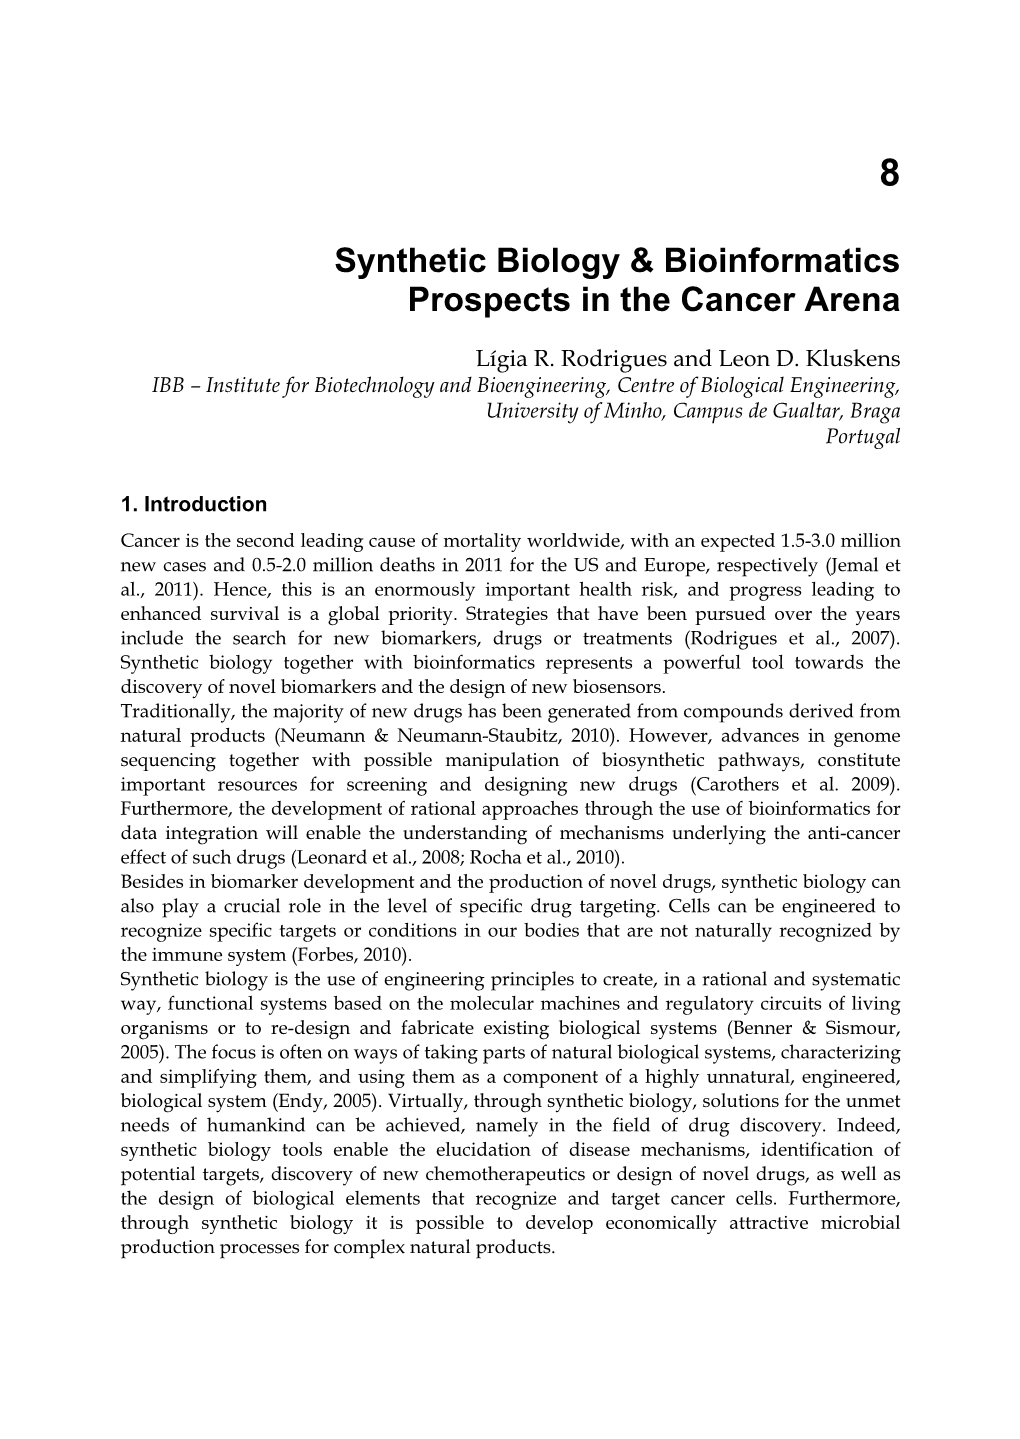 Synthetic Biology & Bioinformatics Prospects in the Cancer Arena